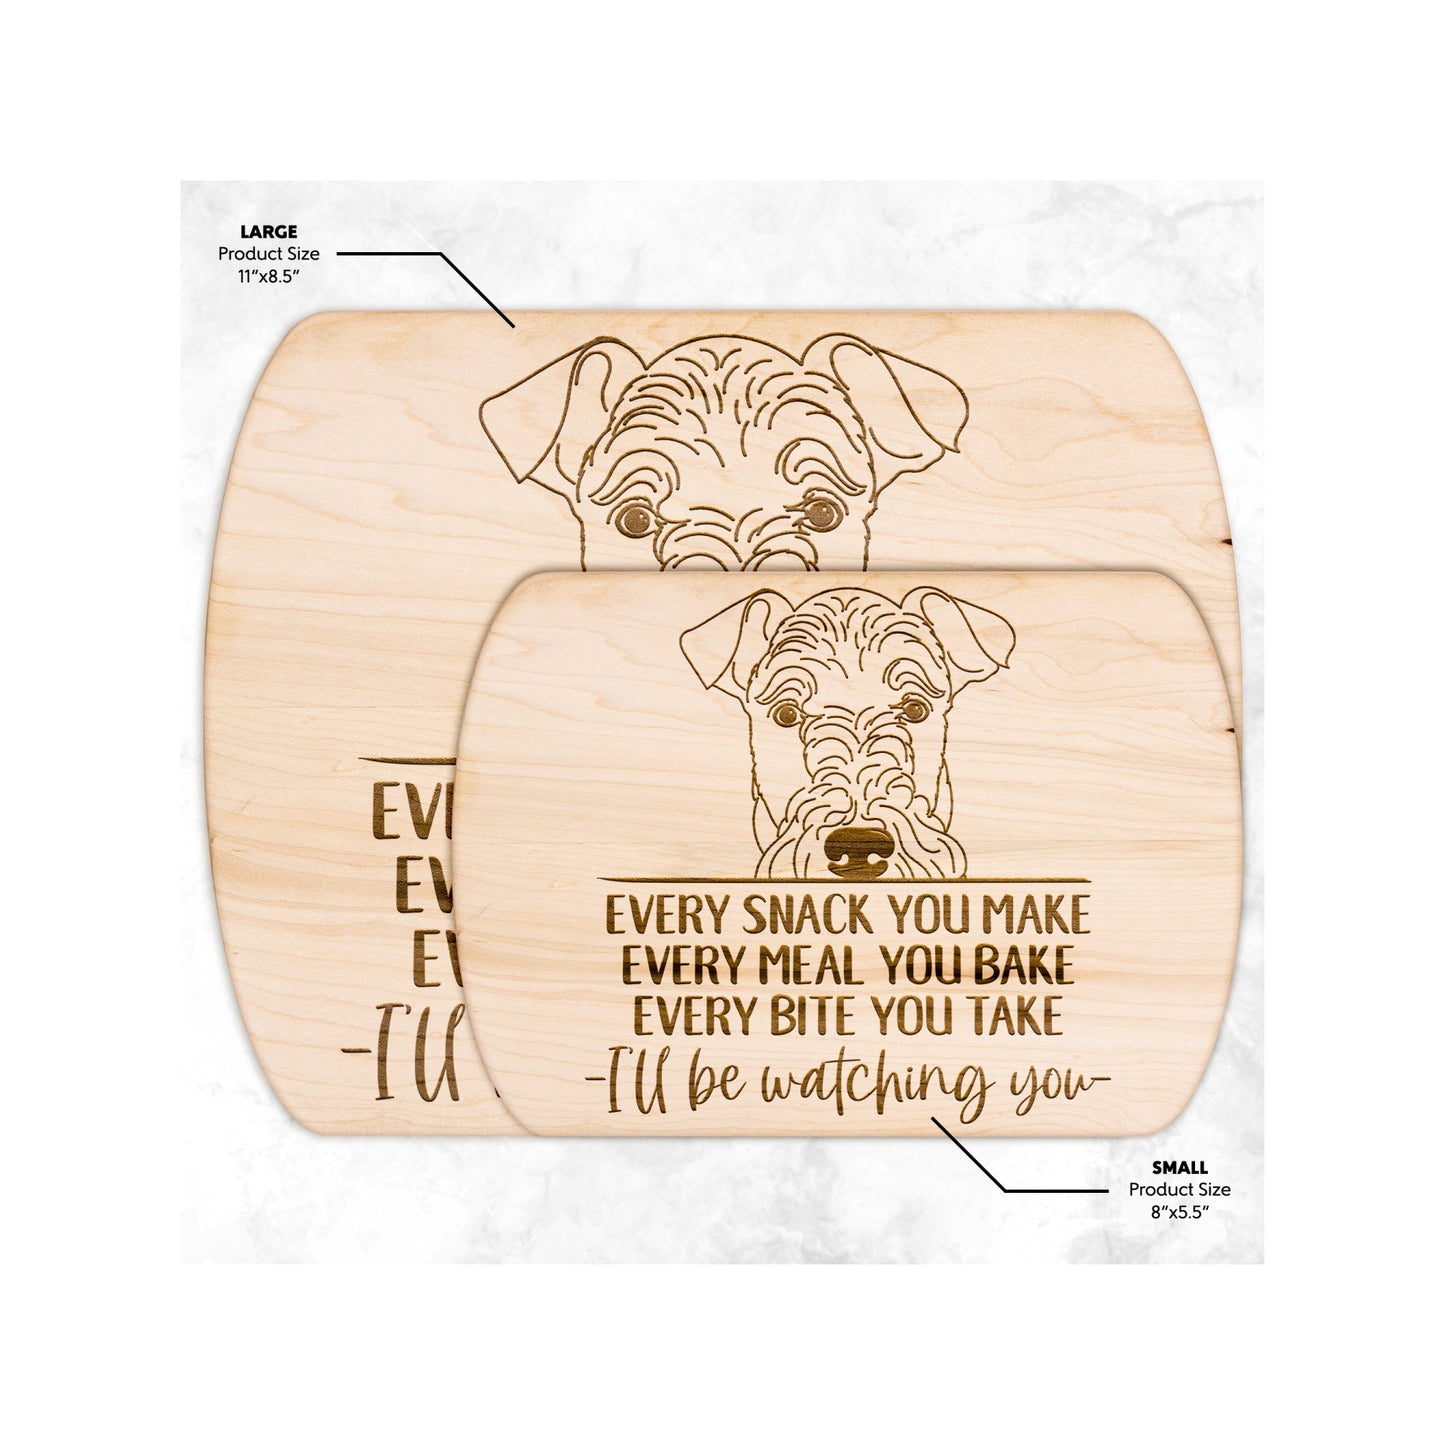 Airedale Terrier Snack Funny Cutting Board for Dog Mom, Dog Lover Wood Serving Board, Charcuterie Board, Wooden Chopping Board Gifts for Him